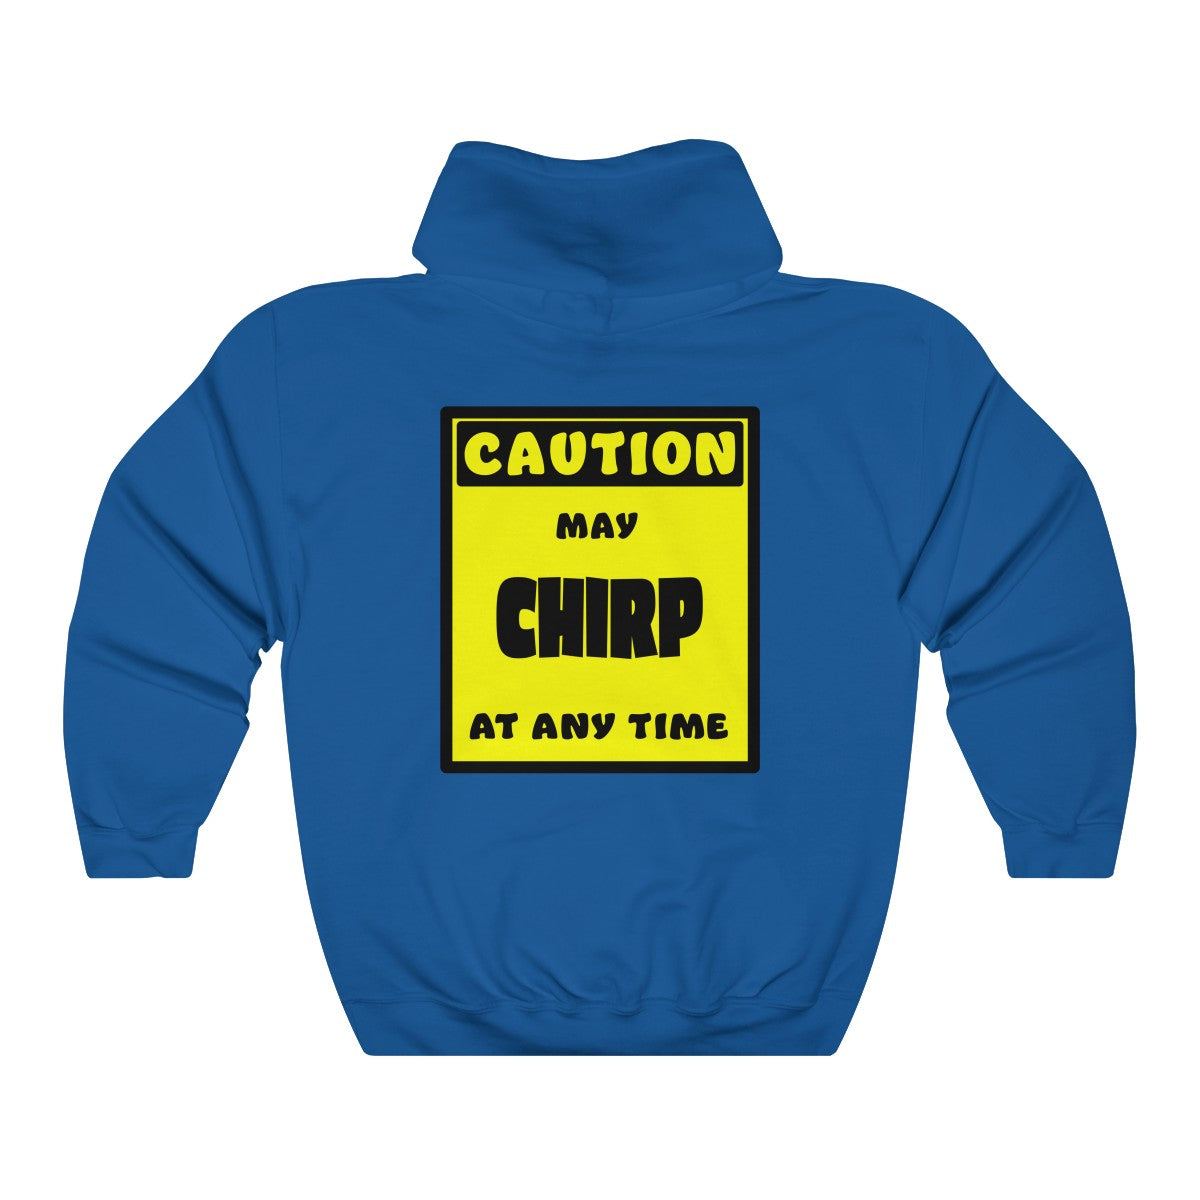 CAUTION! May CHIRP at any time! - Hoodie Hoodie AFLT-Whootorca Royal Blue S 